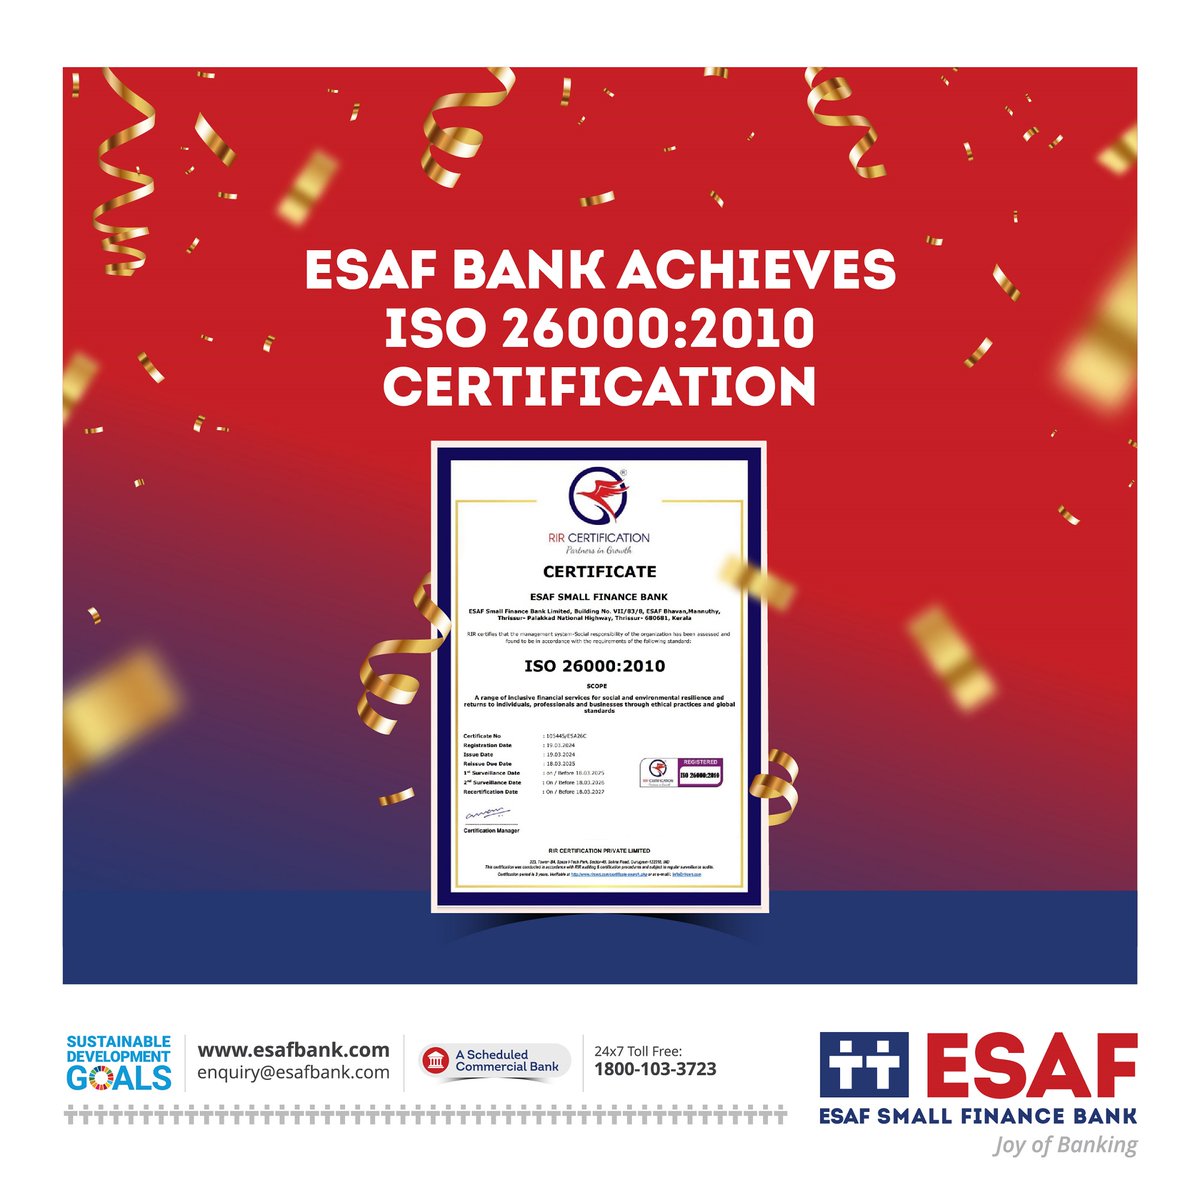 At ESAF Bank, we believe in making a positive impact beyond banking. The certification underscores our commitment to providing a range of inclusive financial services for social and environmental resilience & returns to customers through ethical practices and global standards.